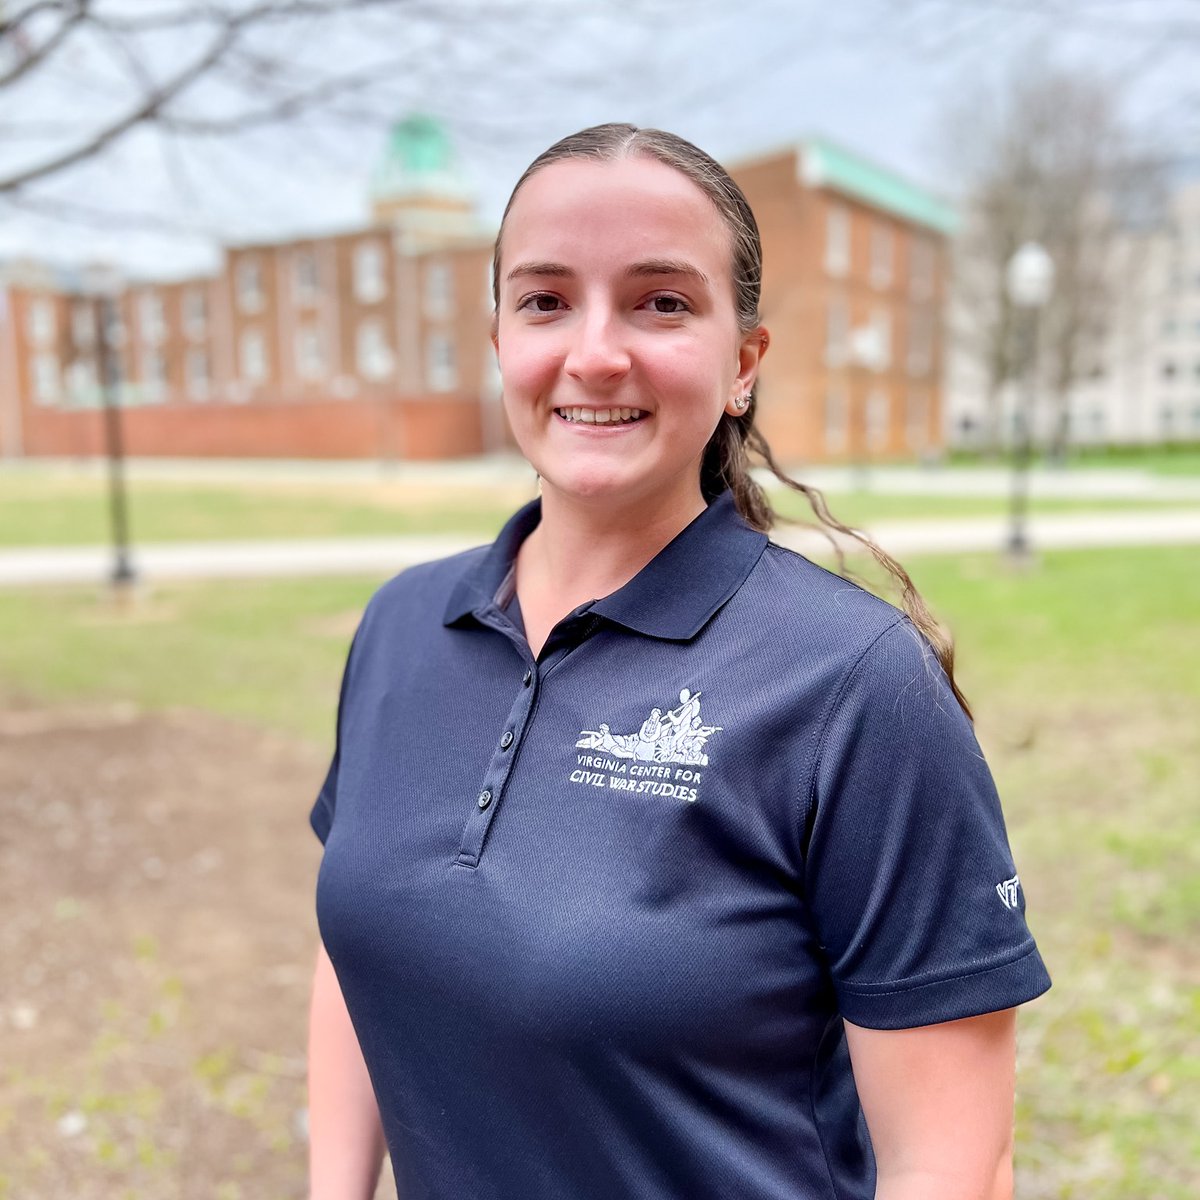 Congratulations to Jillian Sasso -- a senior history and political science double major, an outreach assistant for the Virginia Center for Civil War Studies, and this year's recipient of the James and Martha Banks Award!! Great work, Jillian!